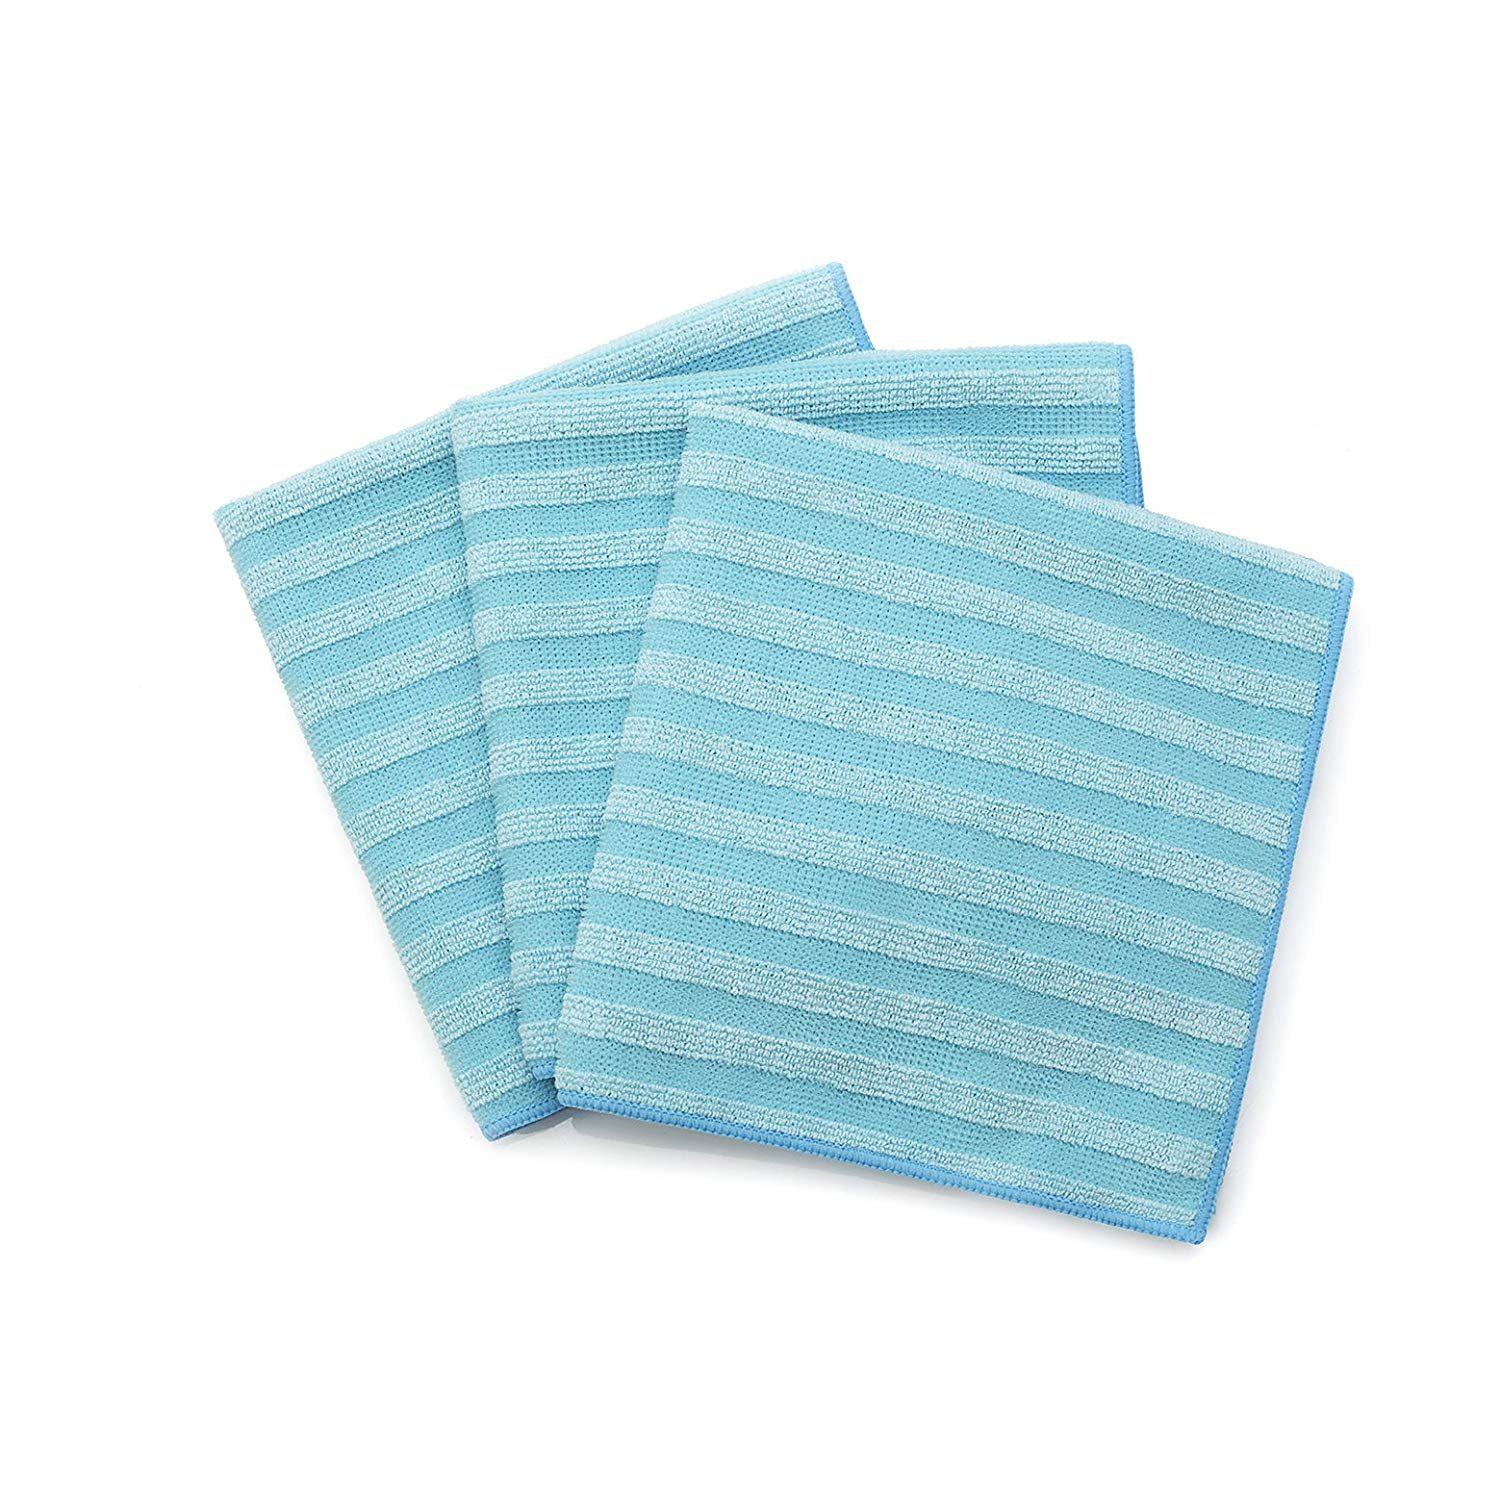 Dish Soap Super Strength Blue River + Dual Action Microfiber Cleaning Cloths (Pack of 3)